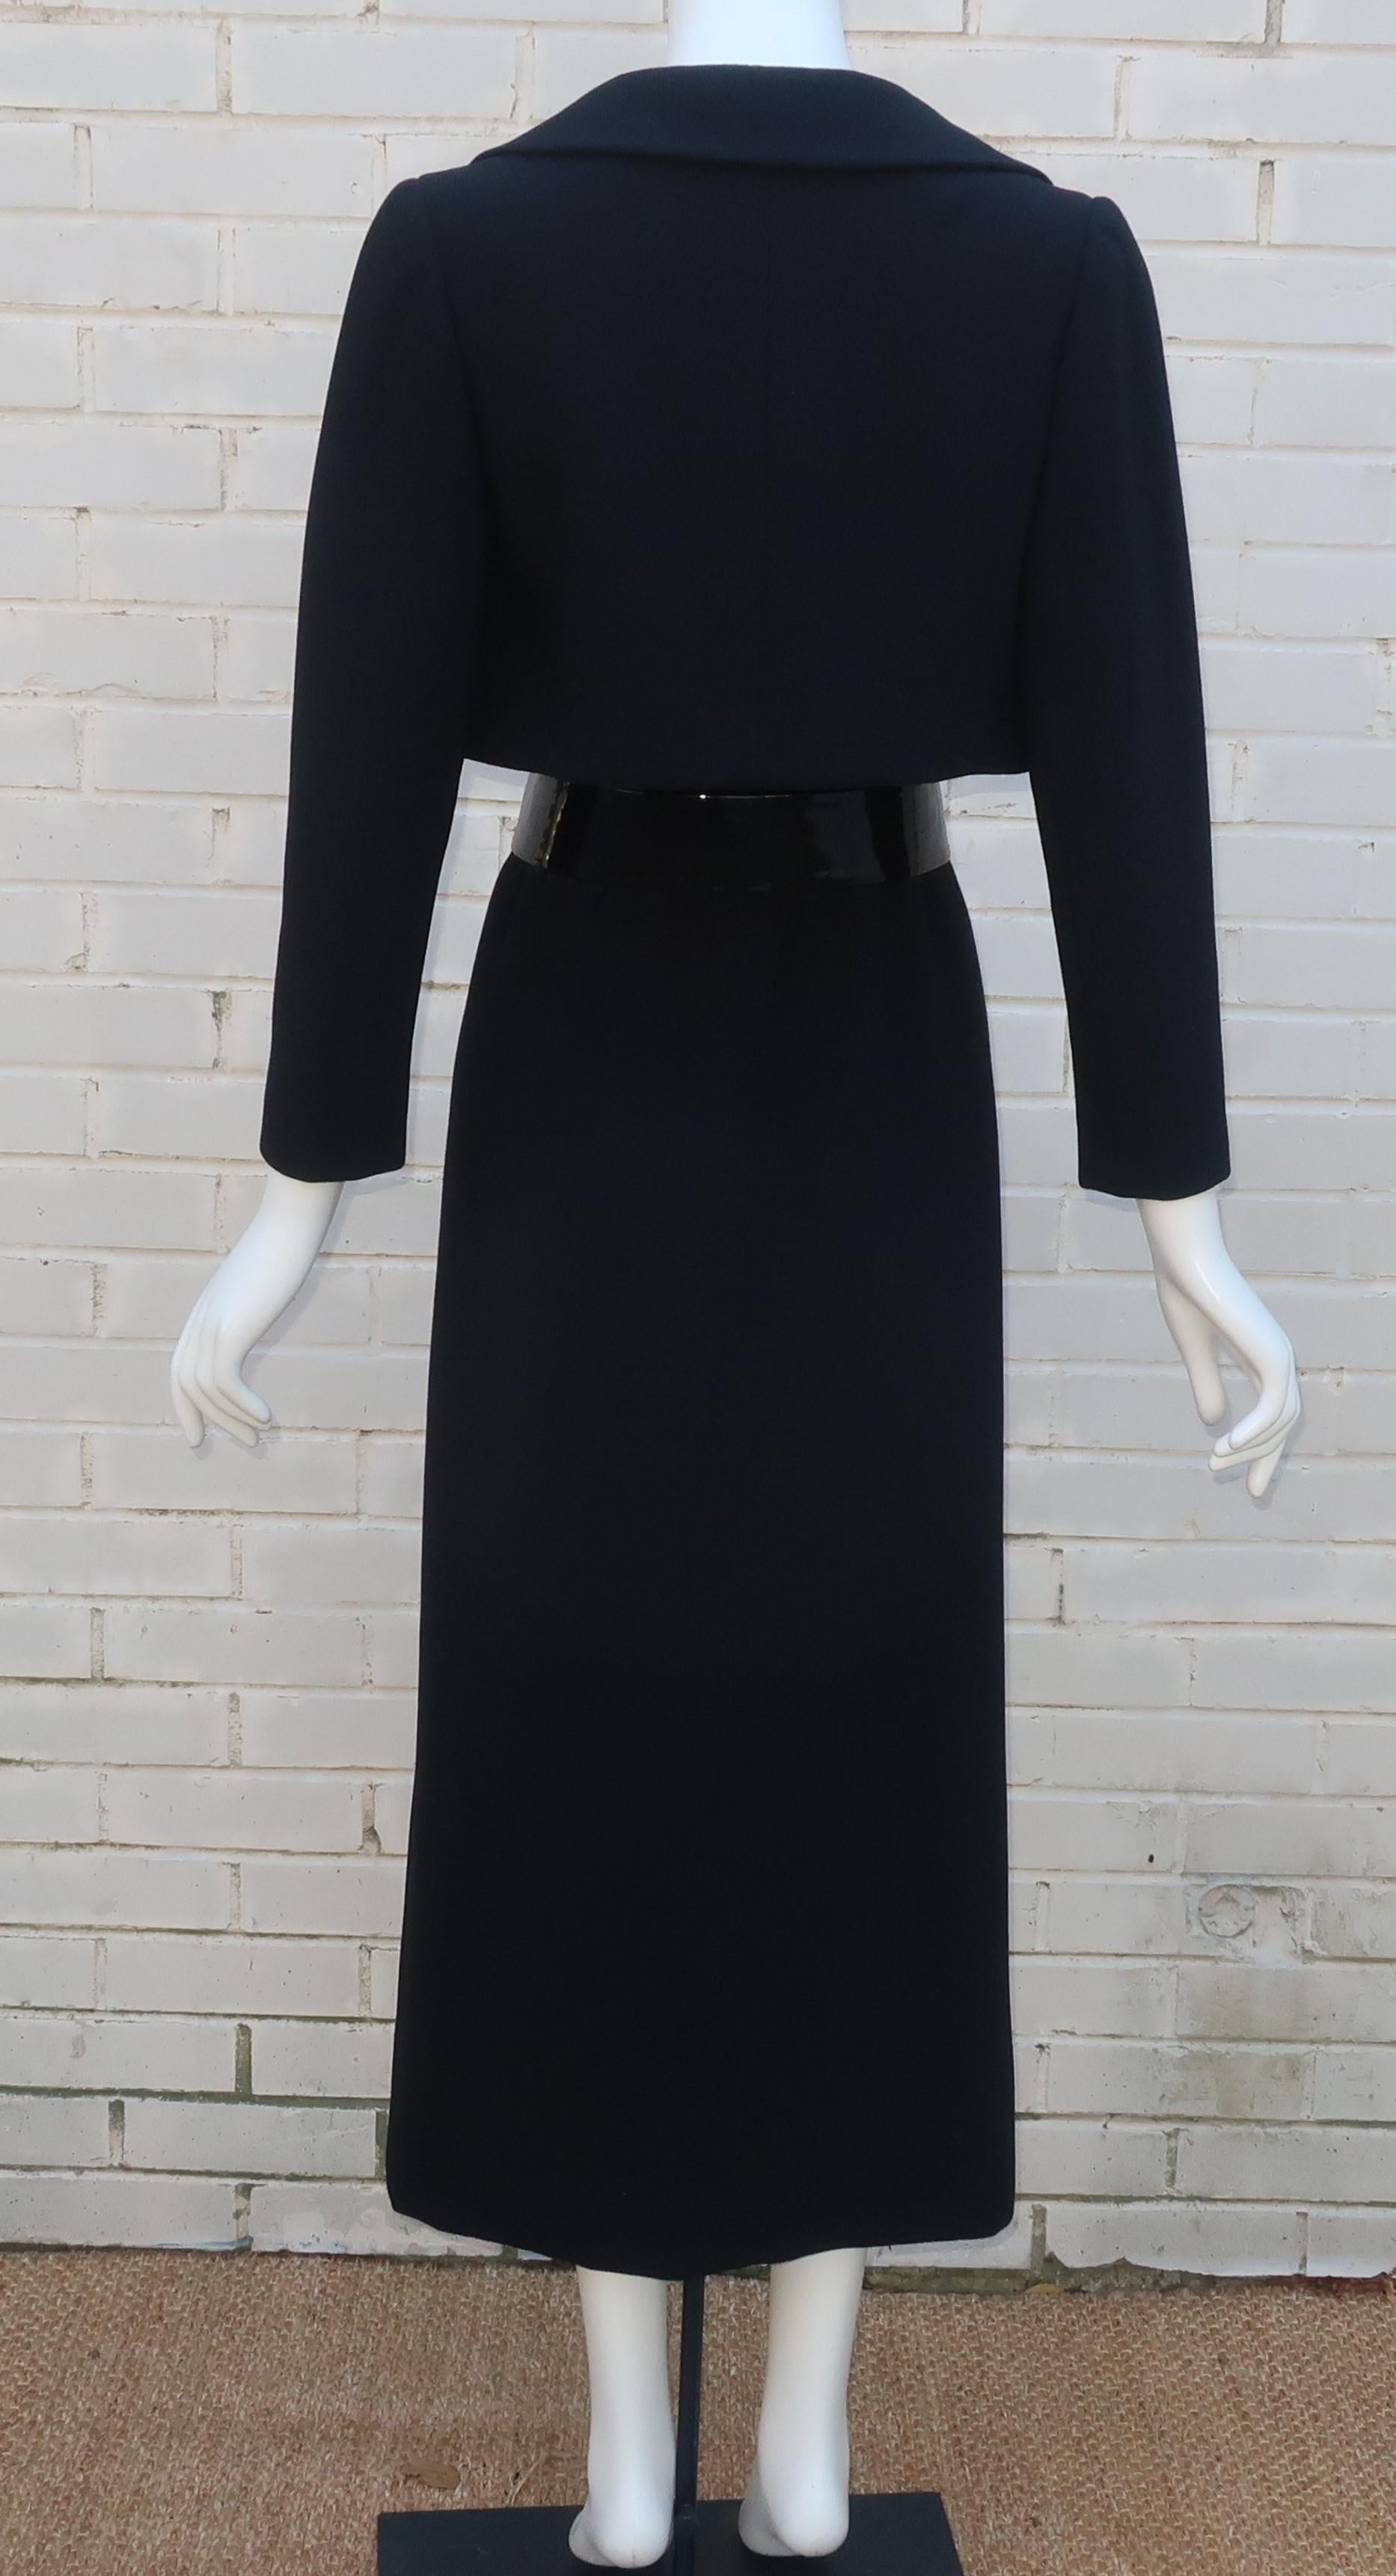 Norman Norell Belted Maxi Skirt Evening Suit With Cropped Jacket, 1968 For Sale 5